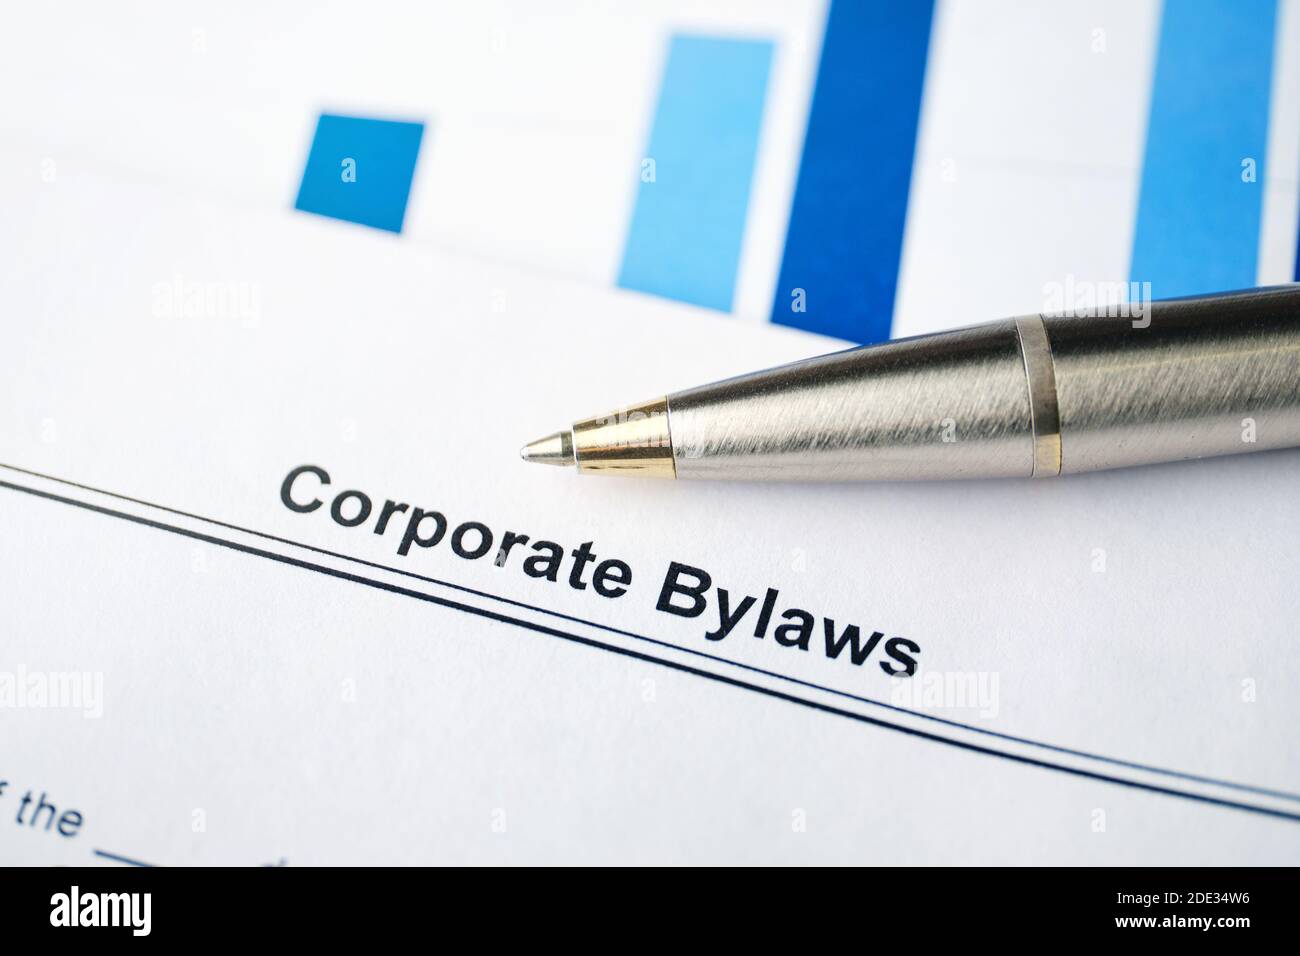 Legal document Corporate Bylaws on paper with pen. Stock Photo